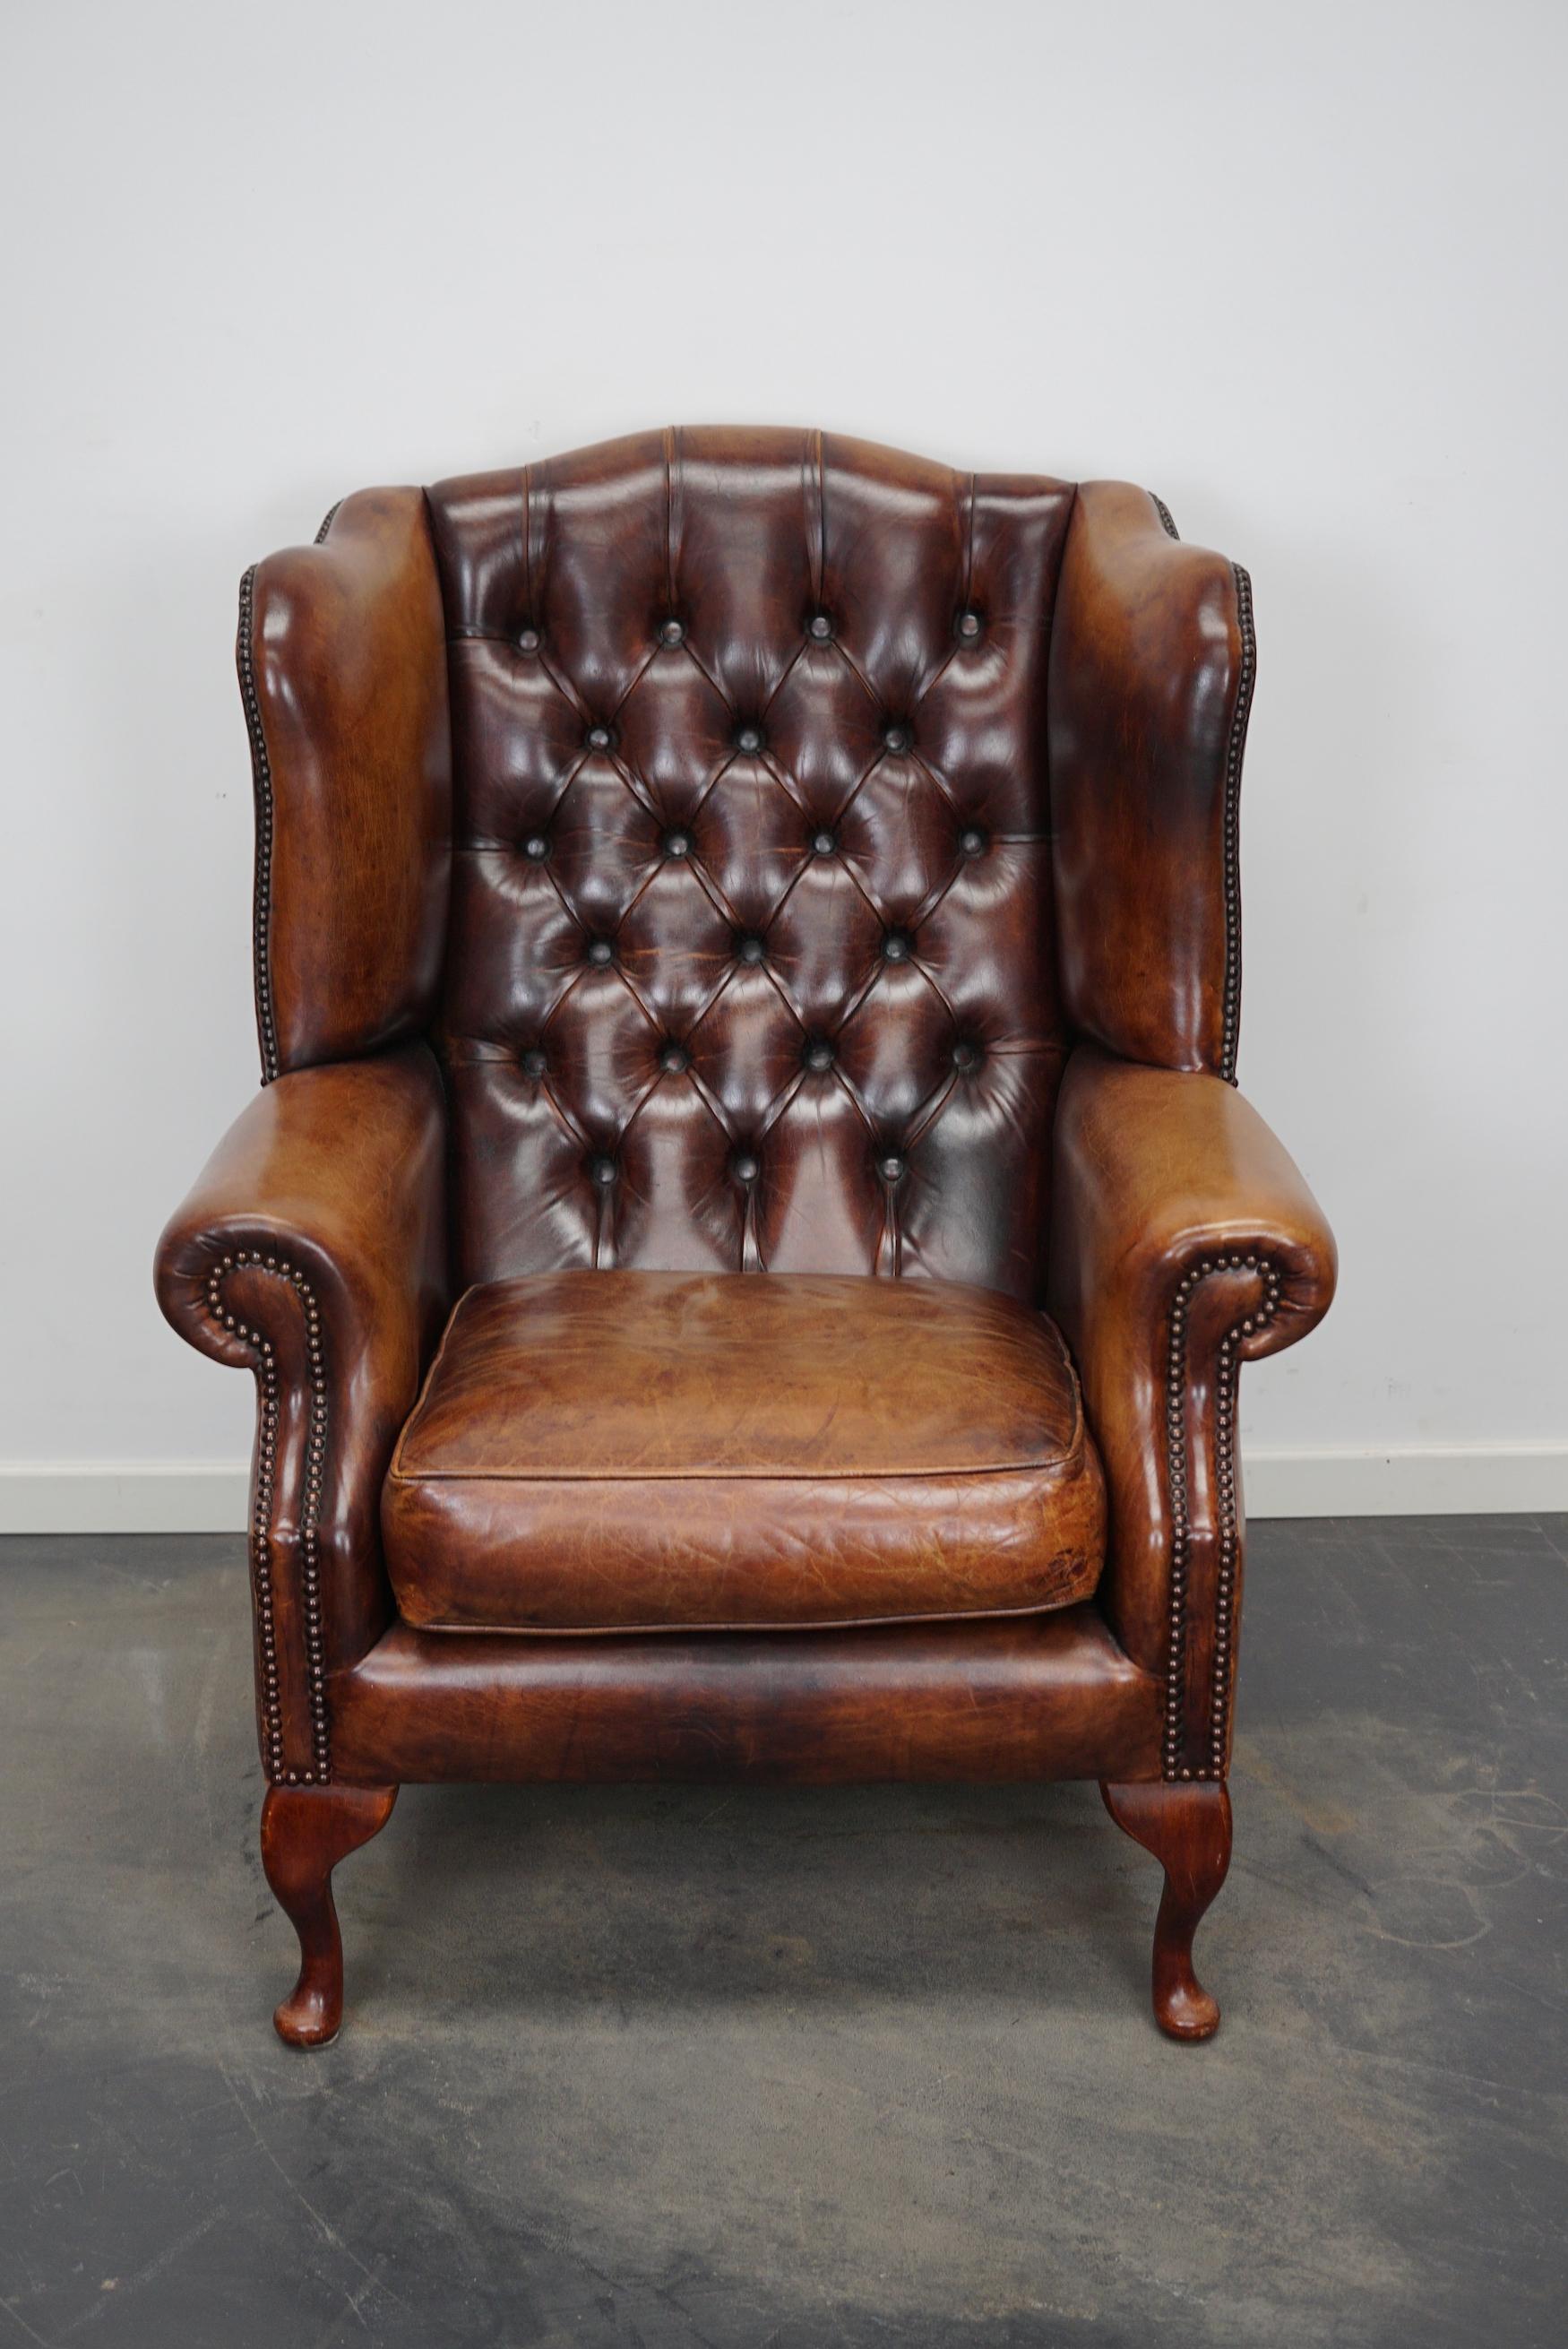 Industrial Vintage Dutch Cognac Colored Leather Club Chair Chesterfield Style